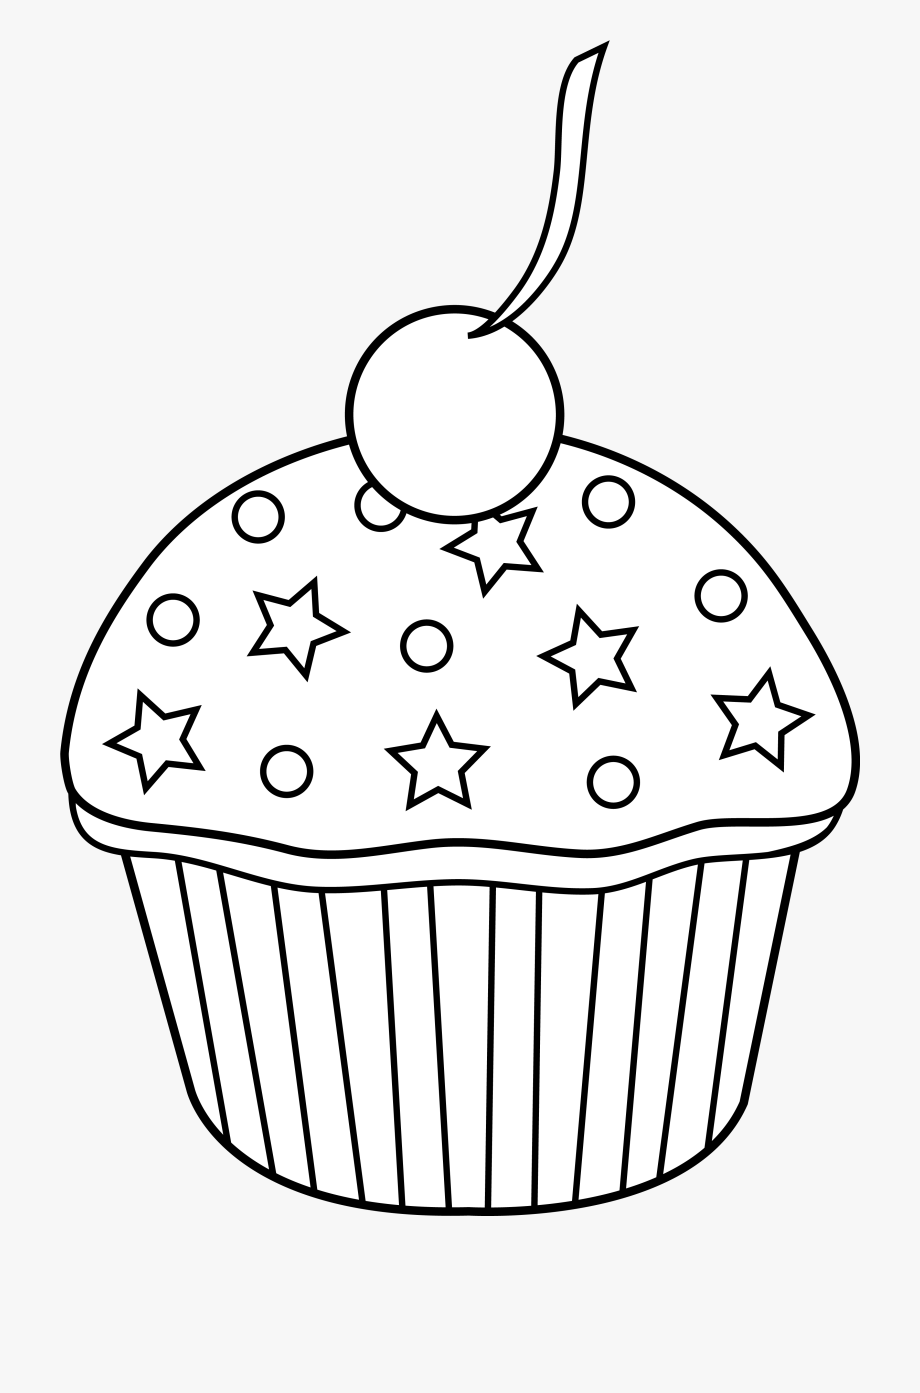 Cupcakes Clipart Colored Cupcake.